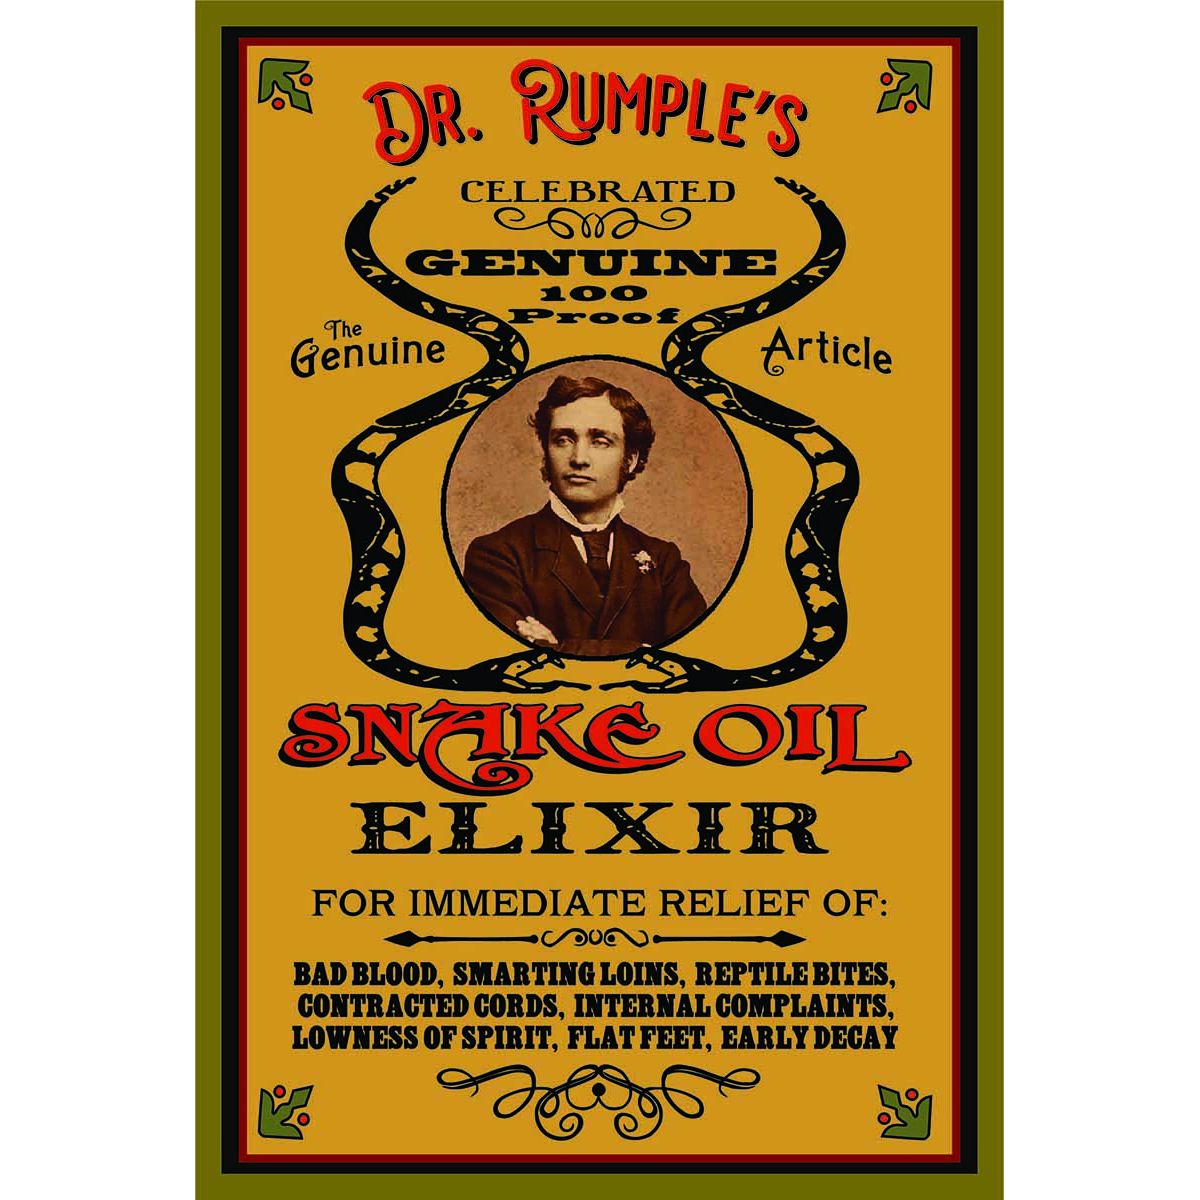 wood sign with novelty ad for snake oil